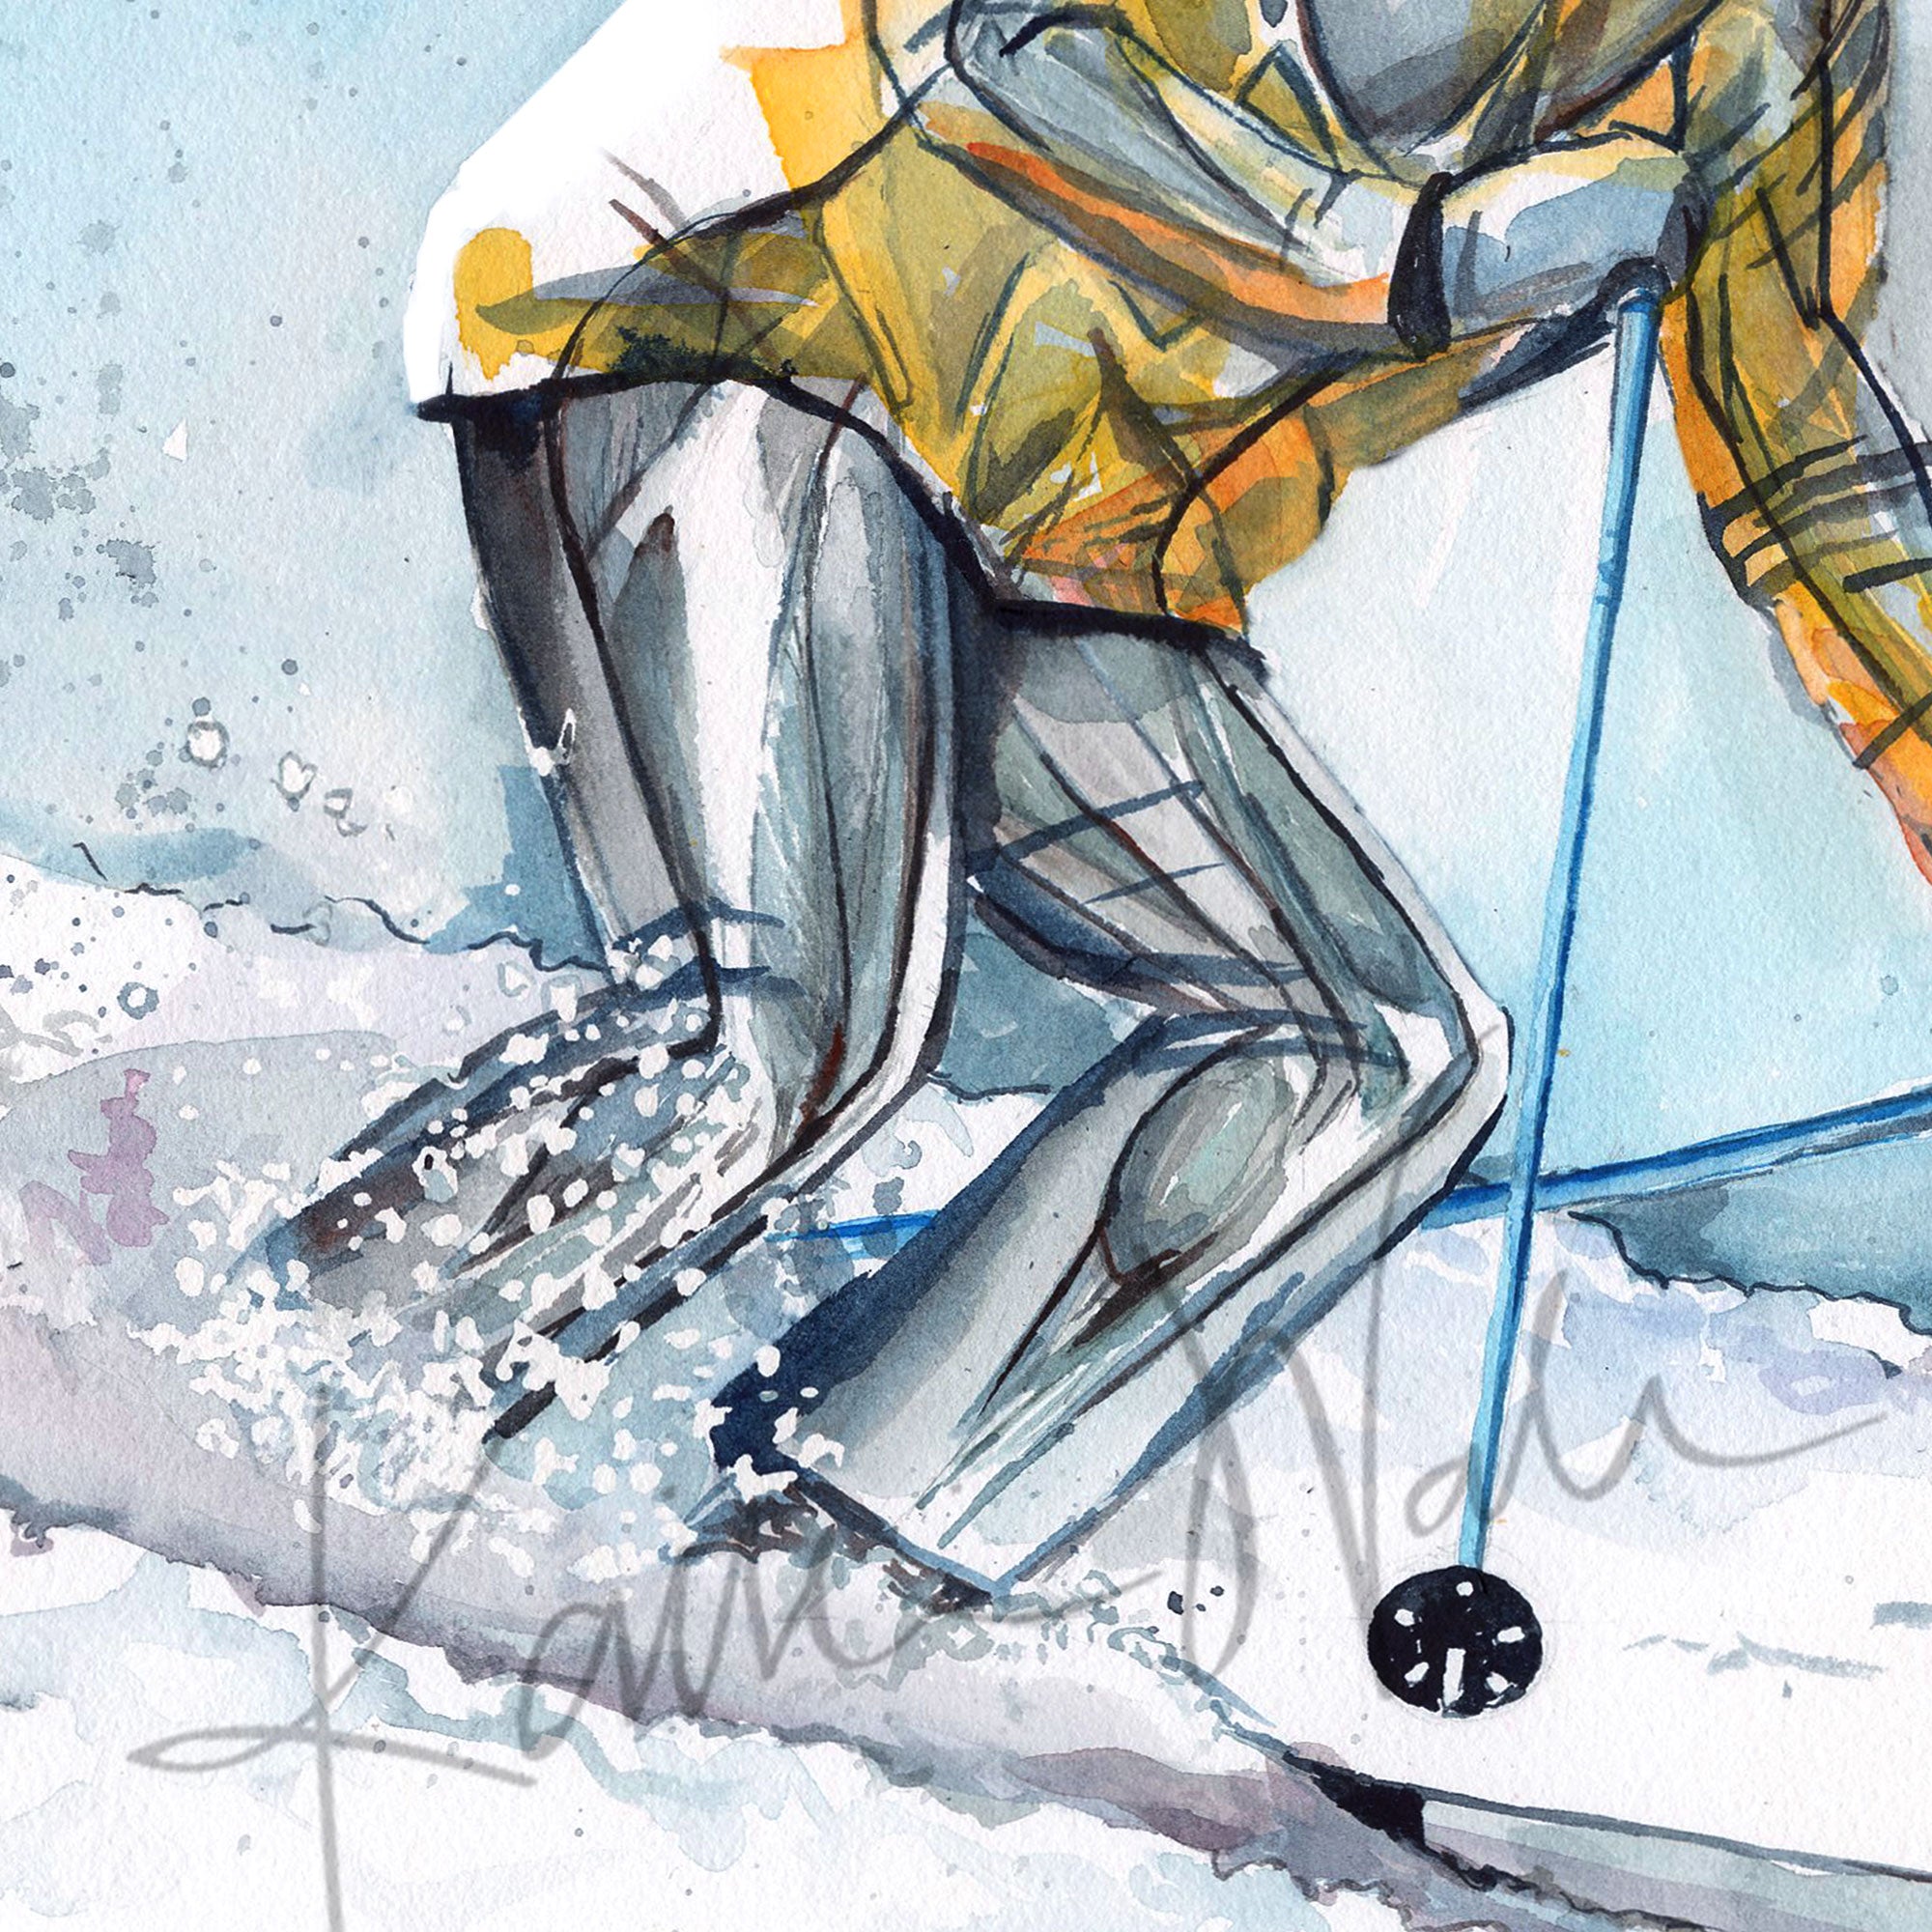 Zoomed in view of a watercolor painting of a skier going down a ski hill with their muscle anatomy showing under their clothing.